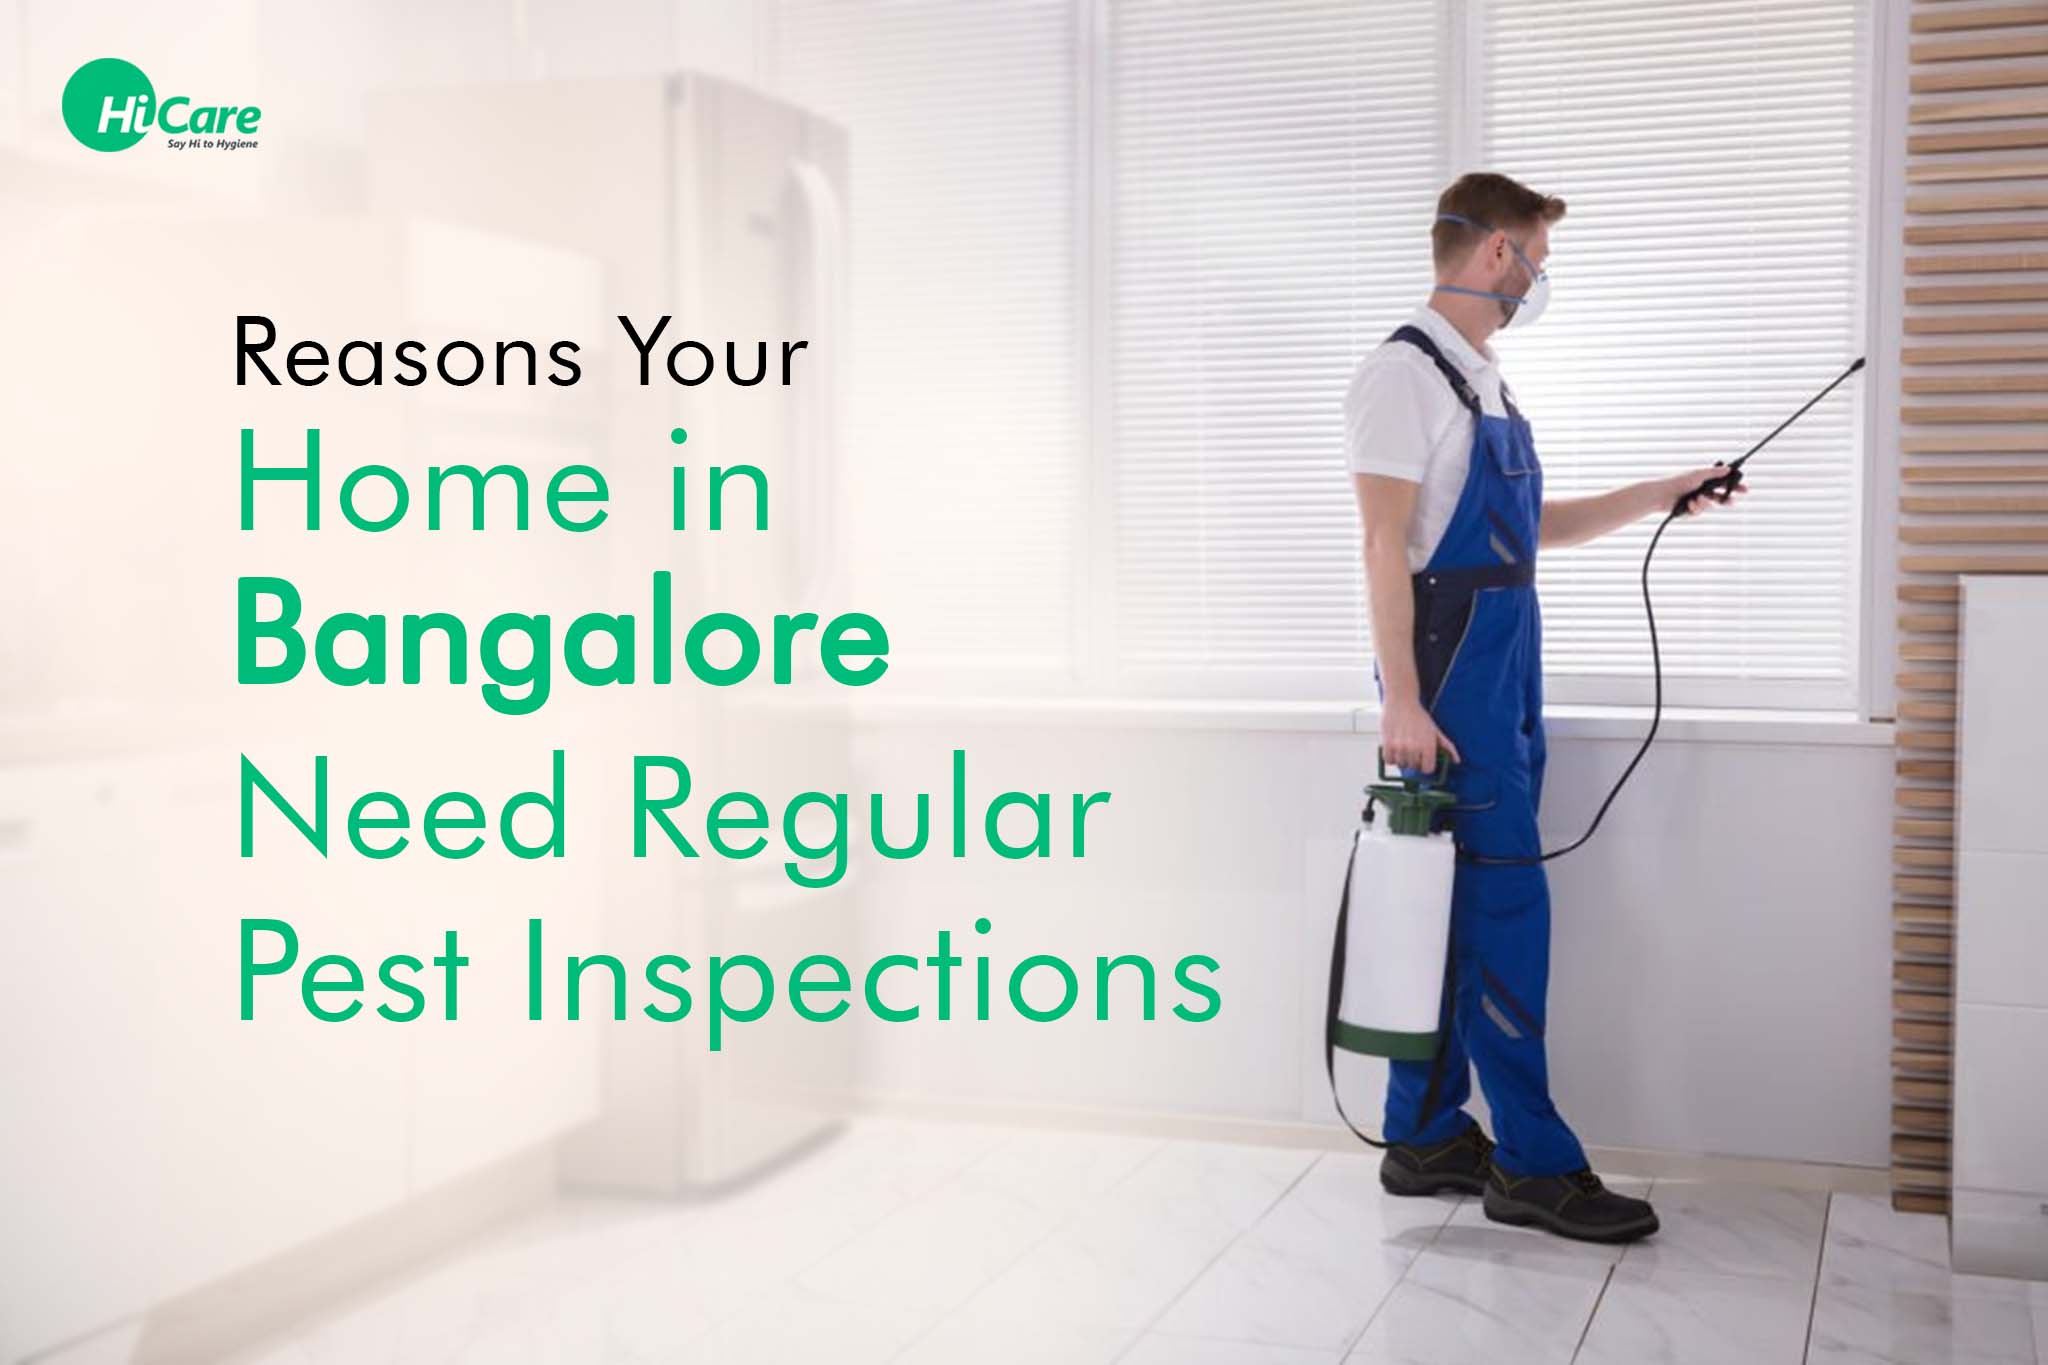 5 Reasons Your Home in Bangalore Need Regular Pest Inspections